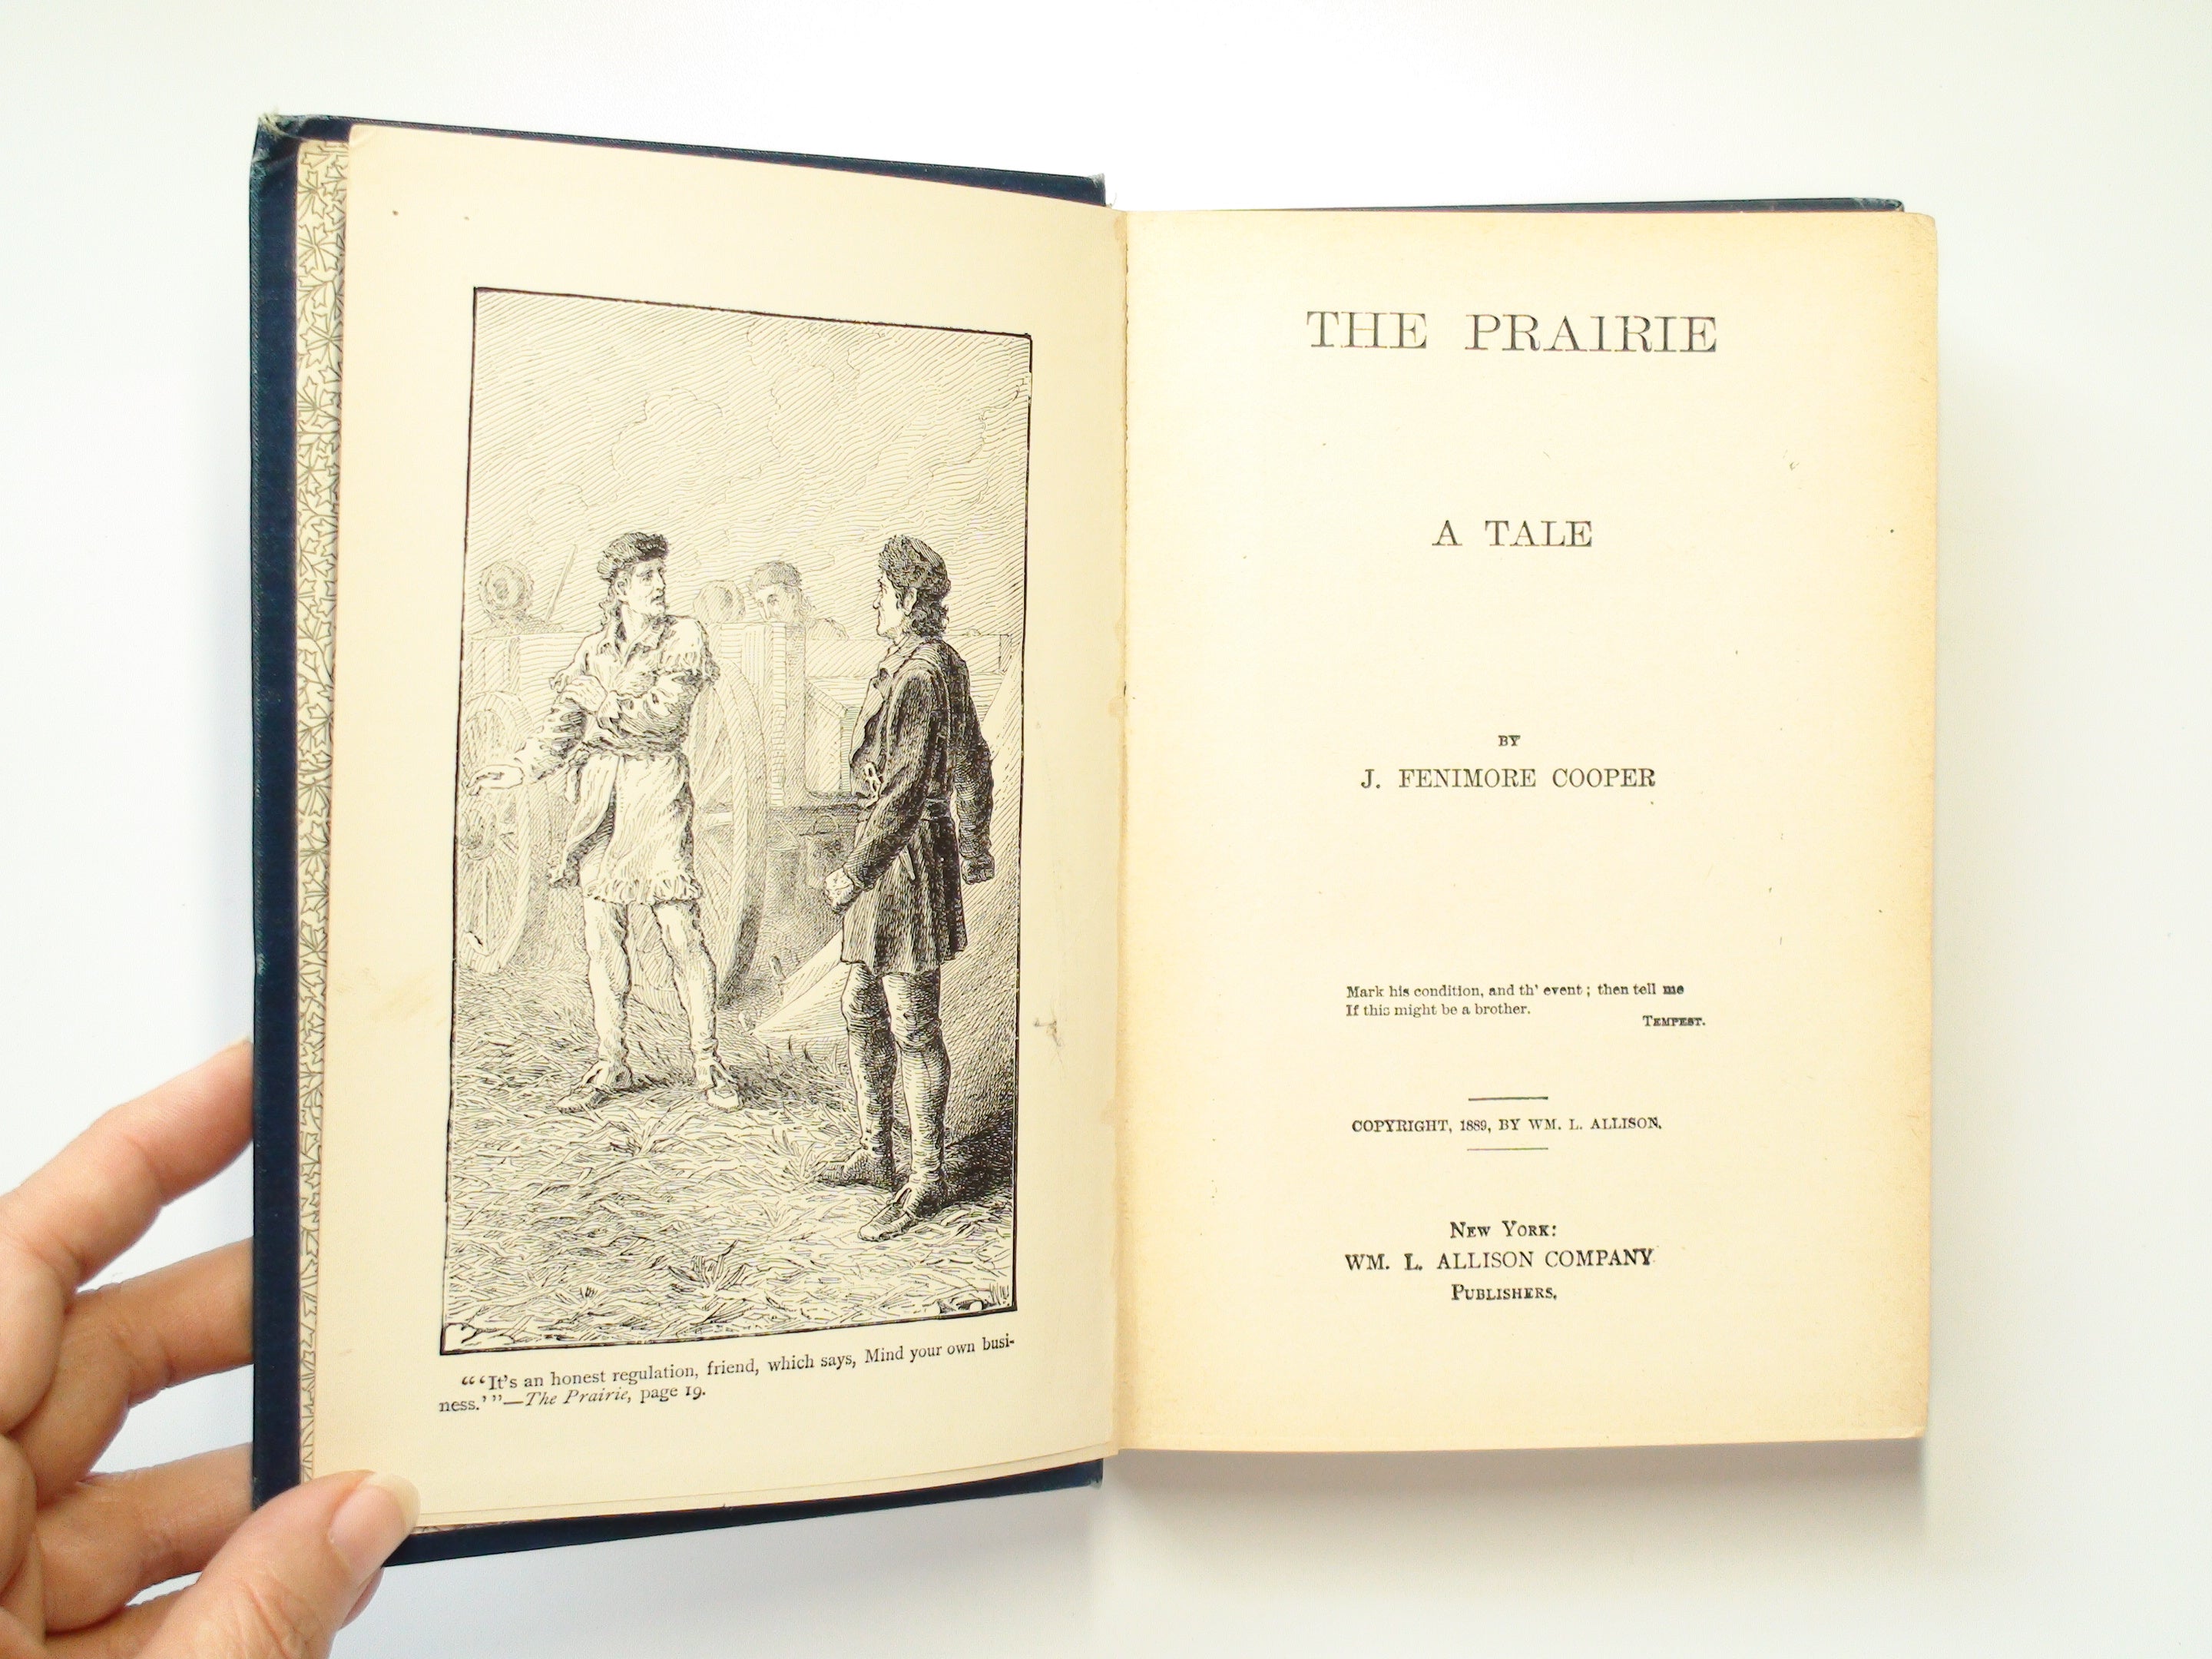 The Prairie, A Tale, by J. Fenimore Cooper, 1889